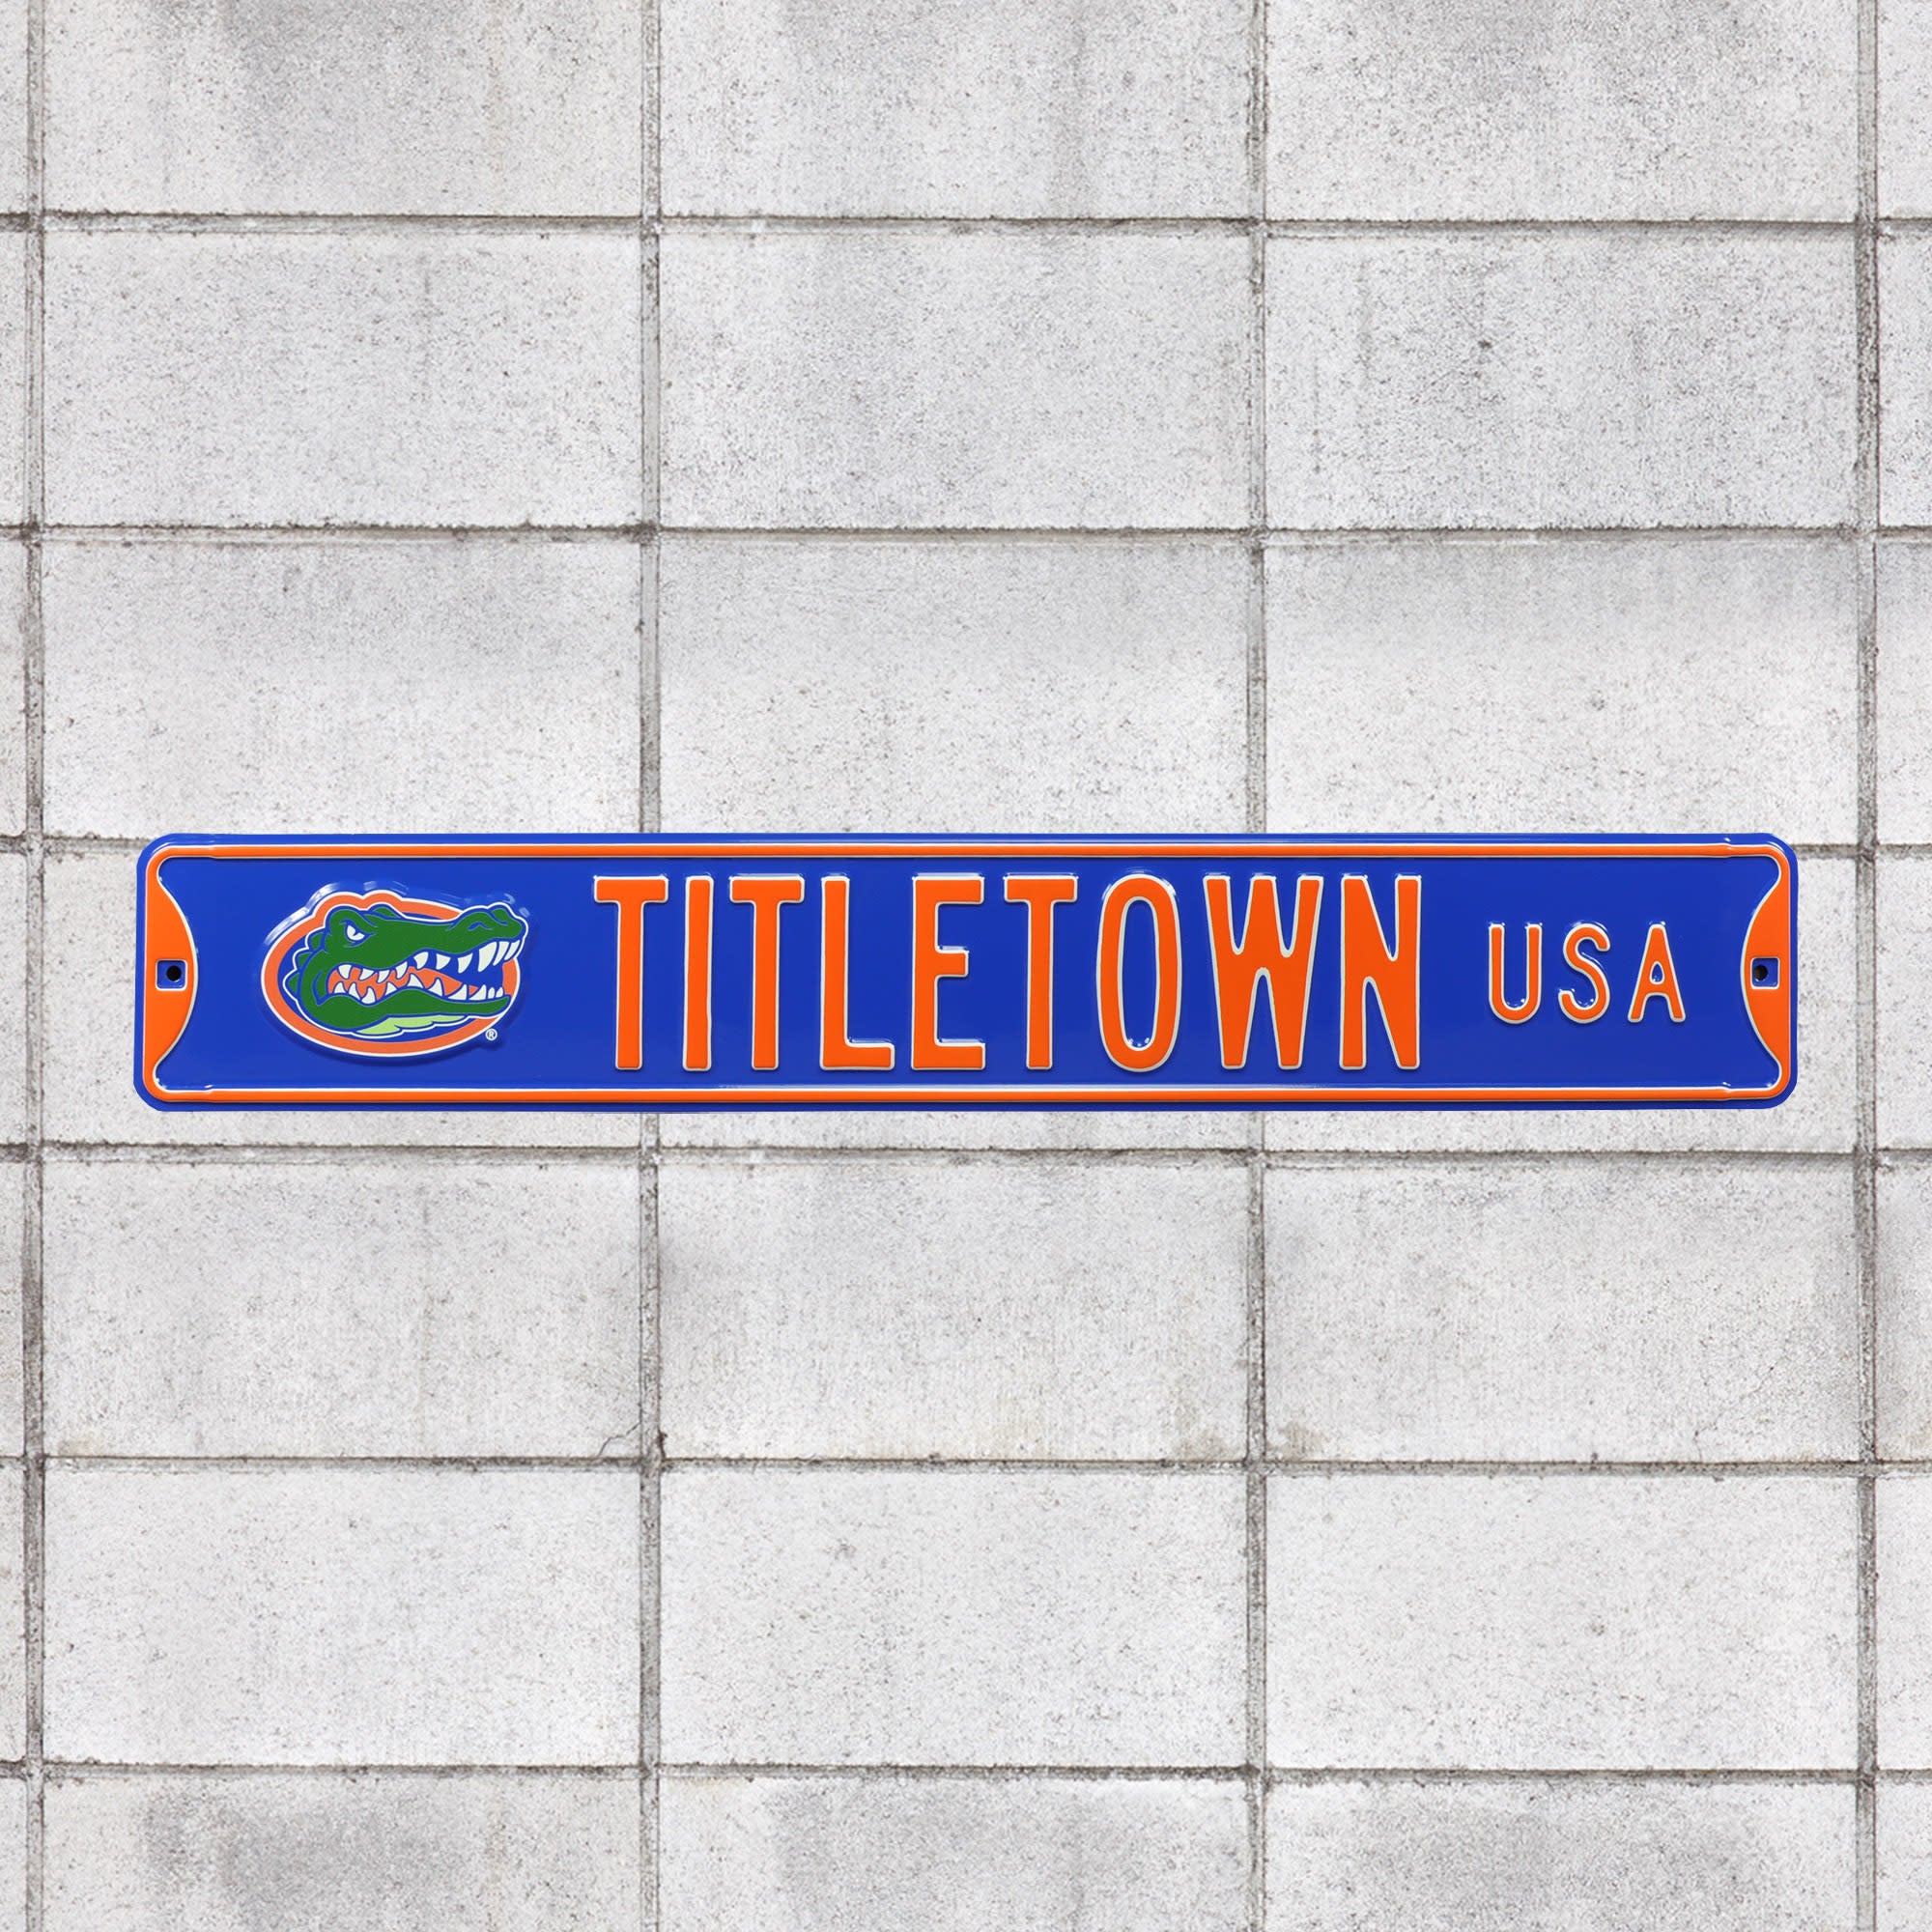 Florida Gators: Titletown USA - Officially Licensed Metal Street Sign by Fathead | 100% Steel